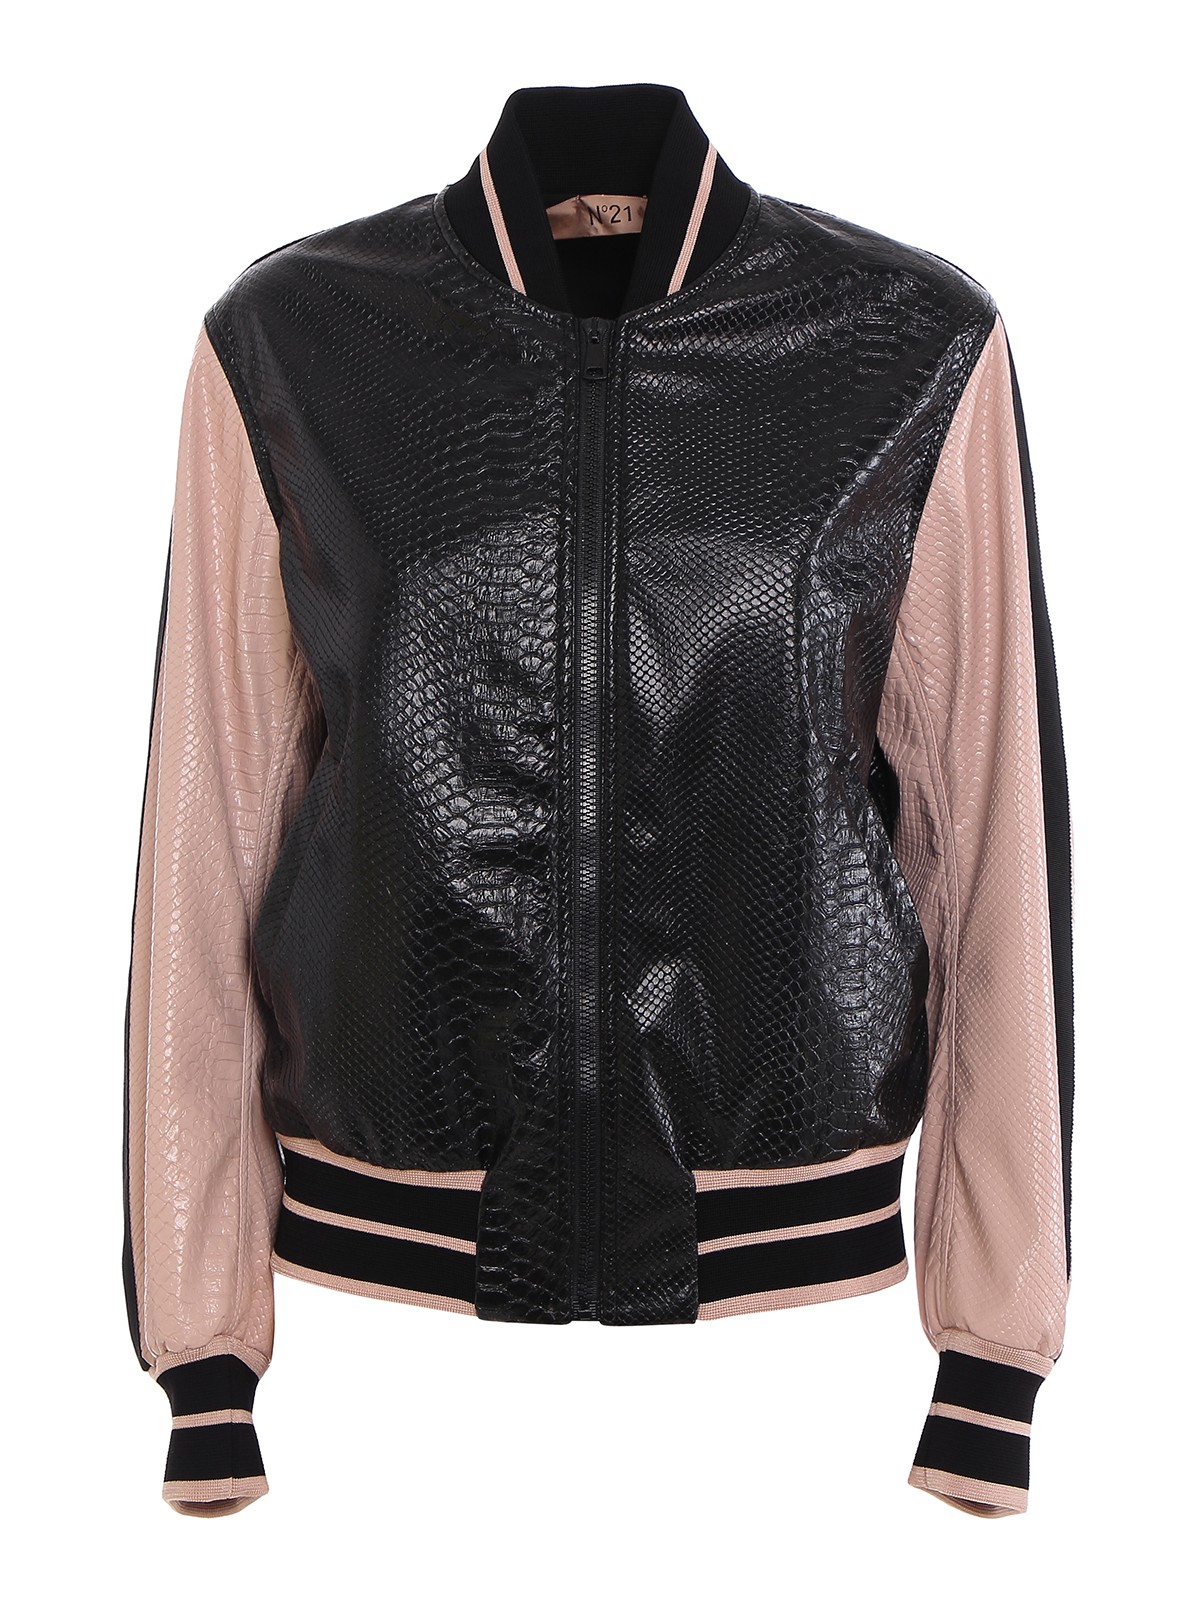 N°21 CROCO PRINTED FAUX LEATHER BOMBER JACKET